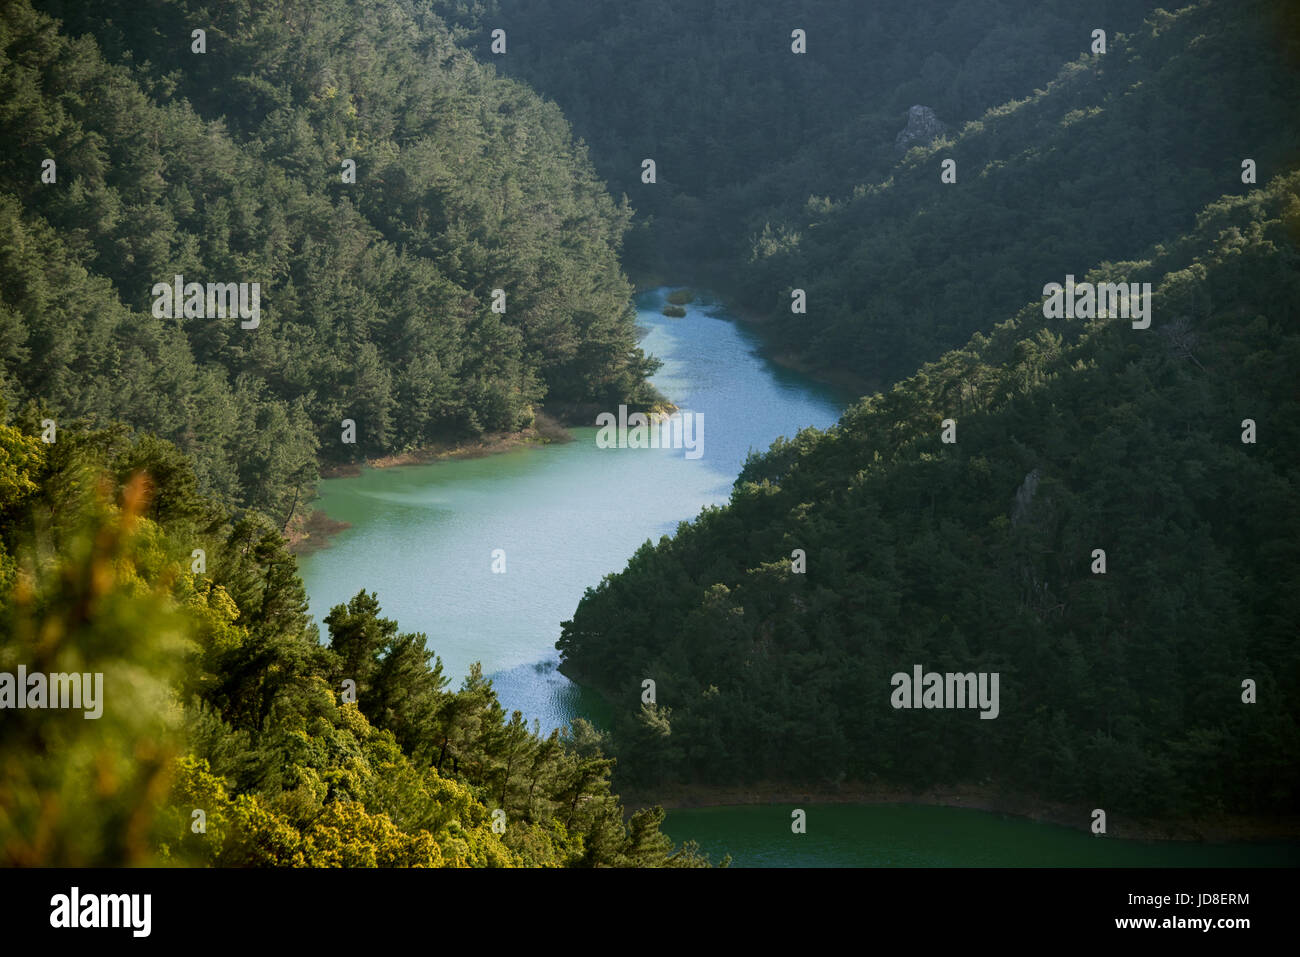 River from top view and between the mountains with pine trees. Stock Photo